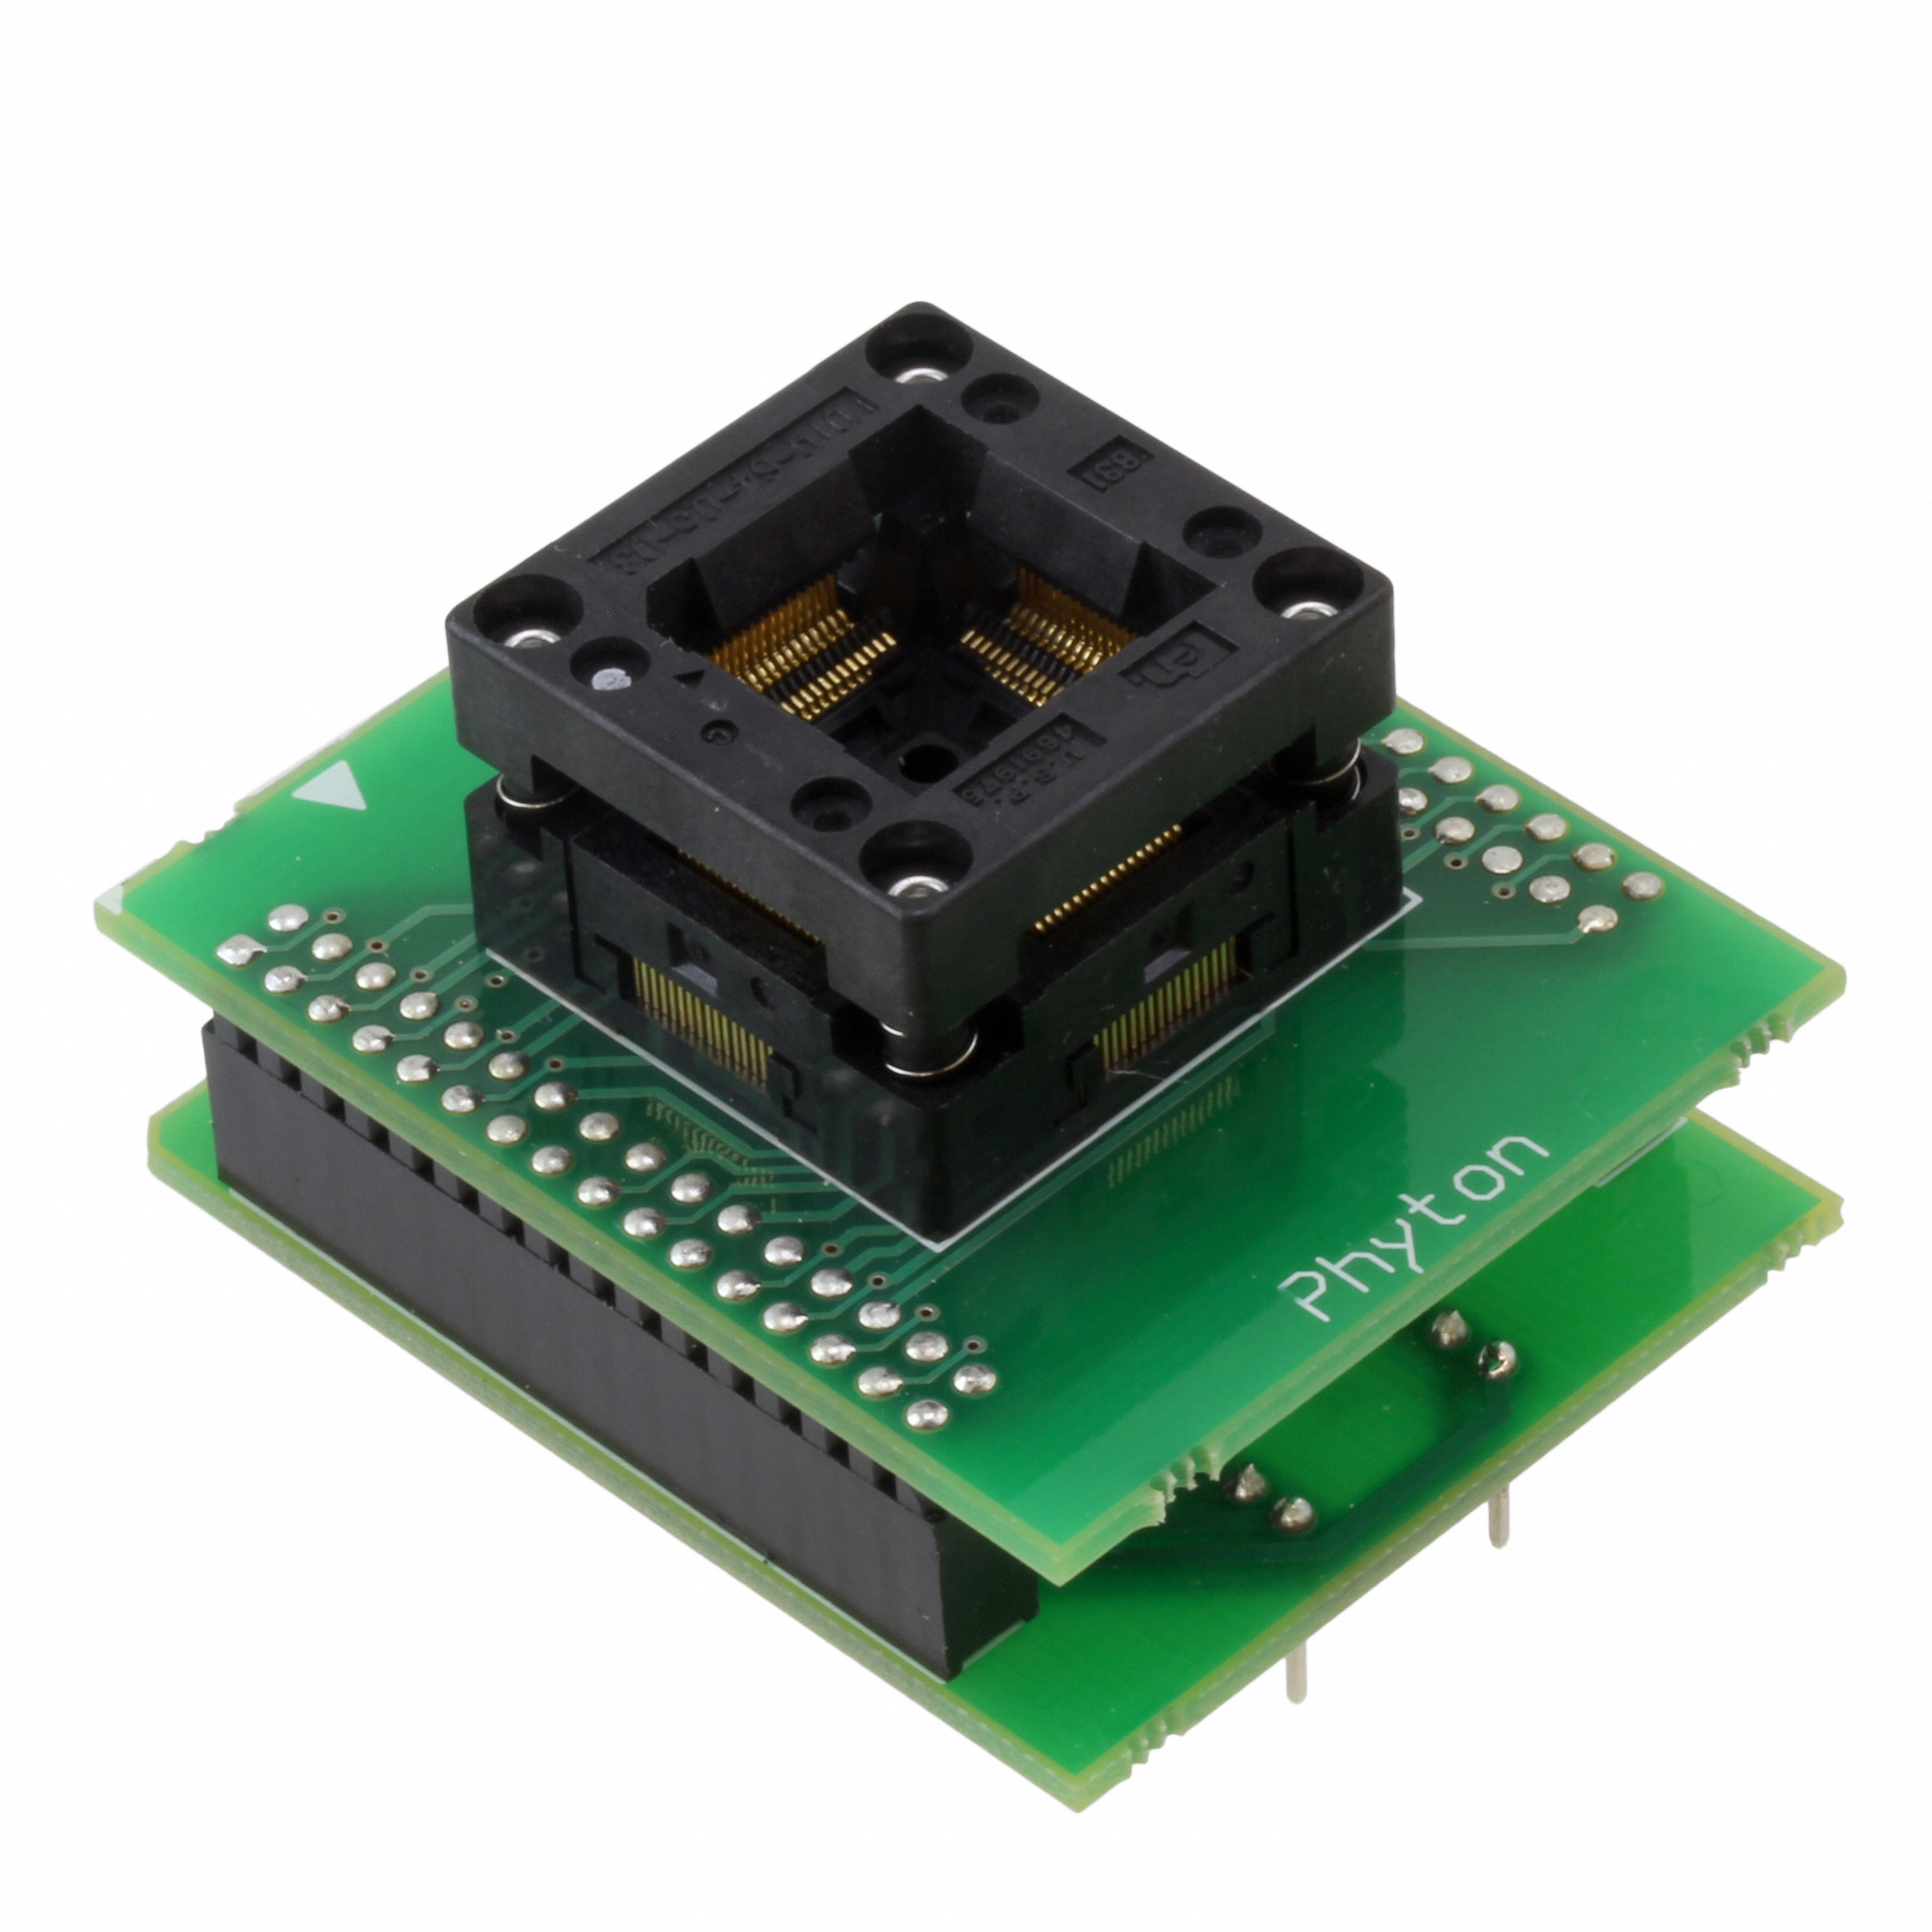 【AE-Q64-STM8】ADAPTER SOCKET 64-QFP TO 40-DIP